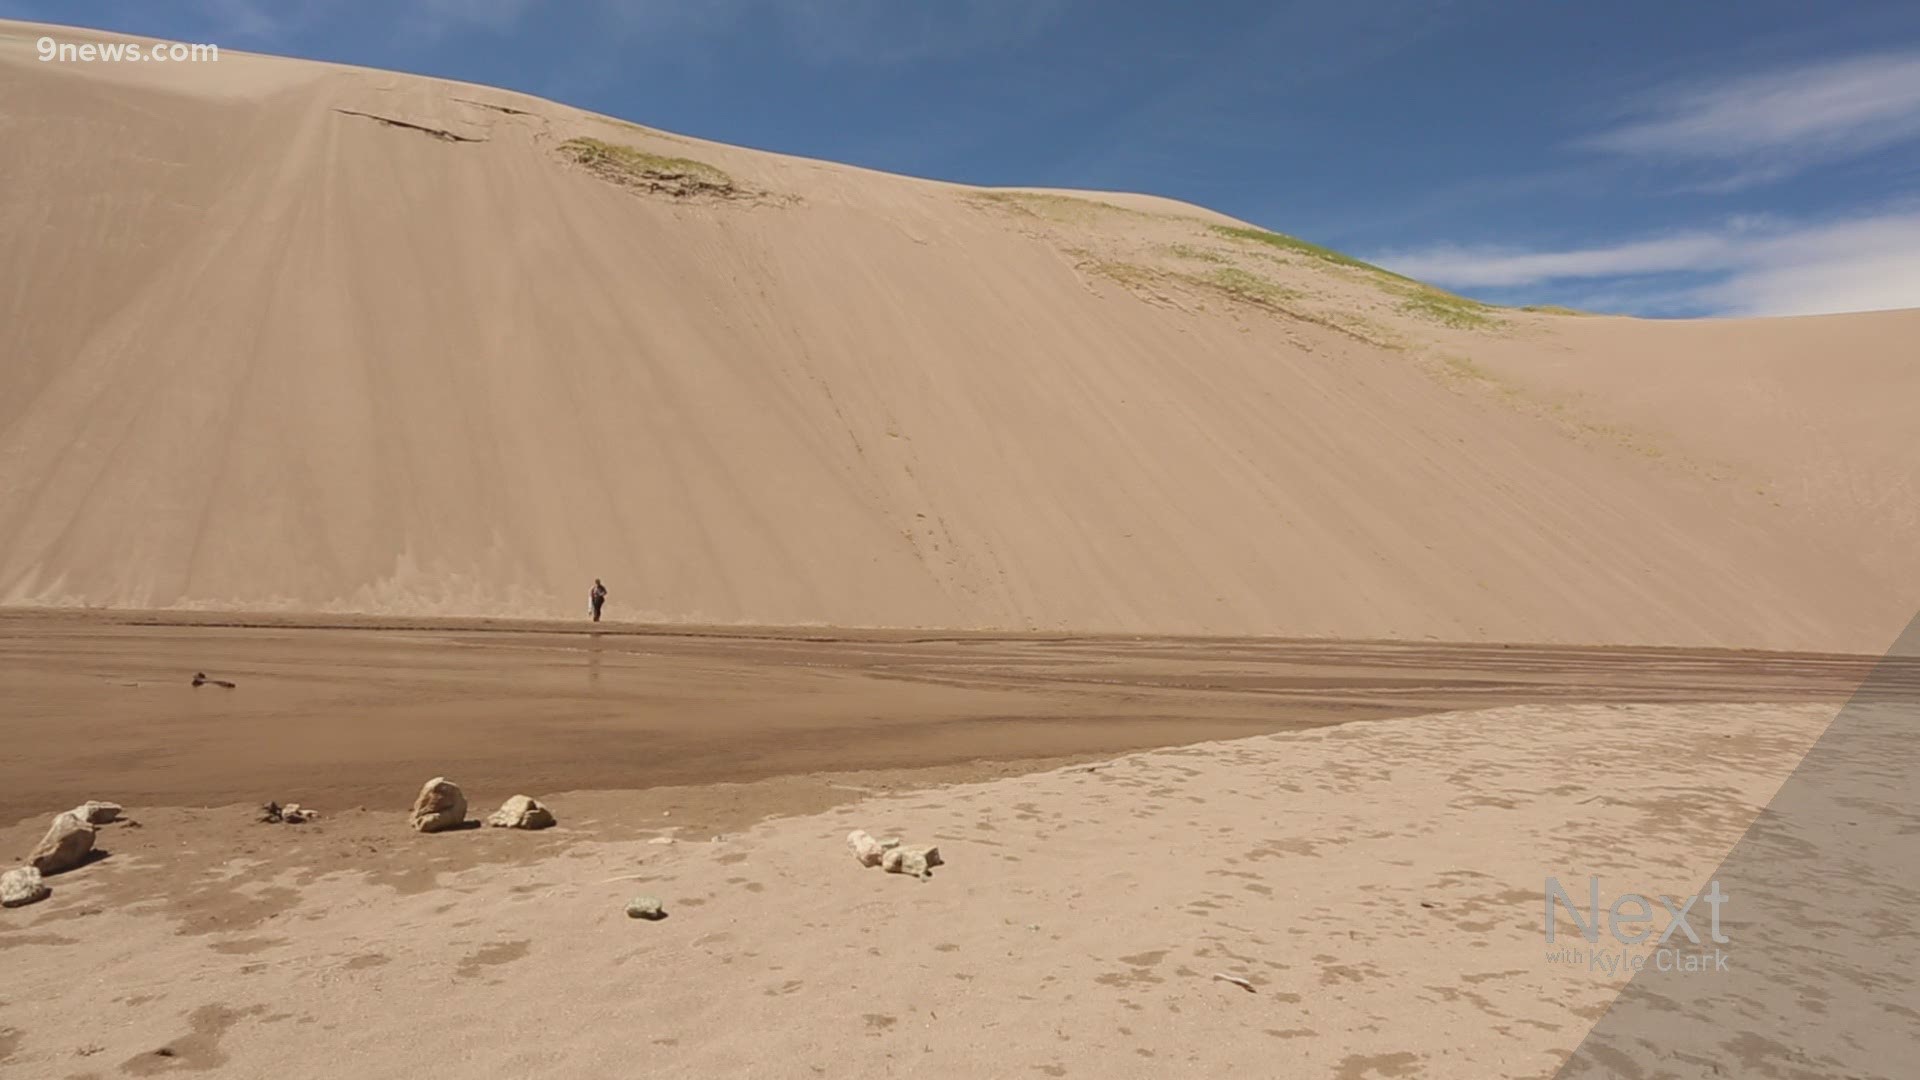 While Great Sand Dunes National Park is in Colorado, it doesn't have to follow the statewide fire restrictions that are currently in place.